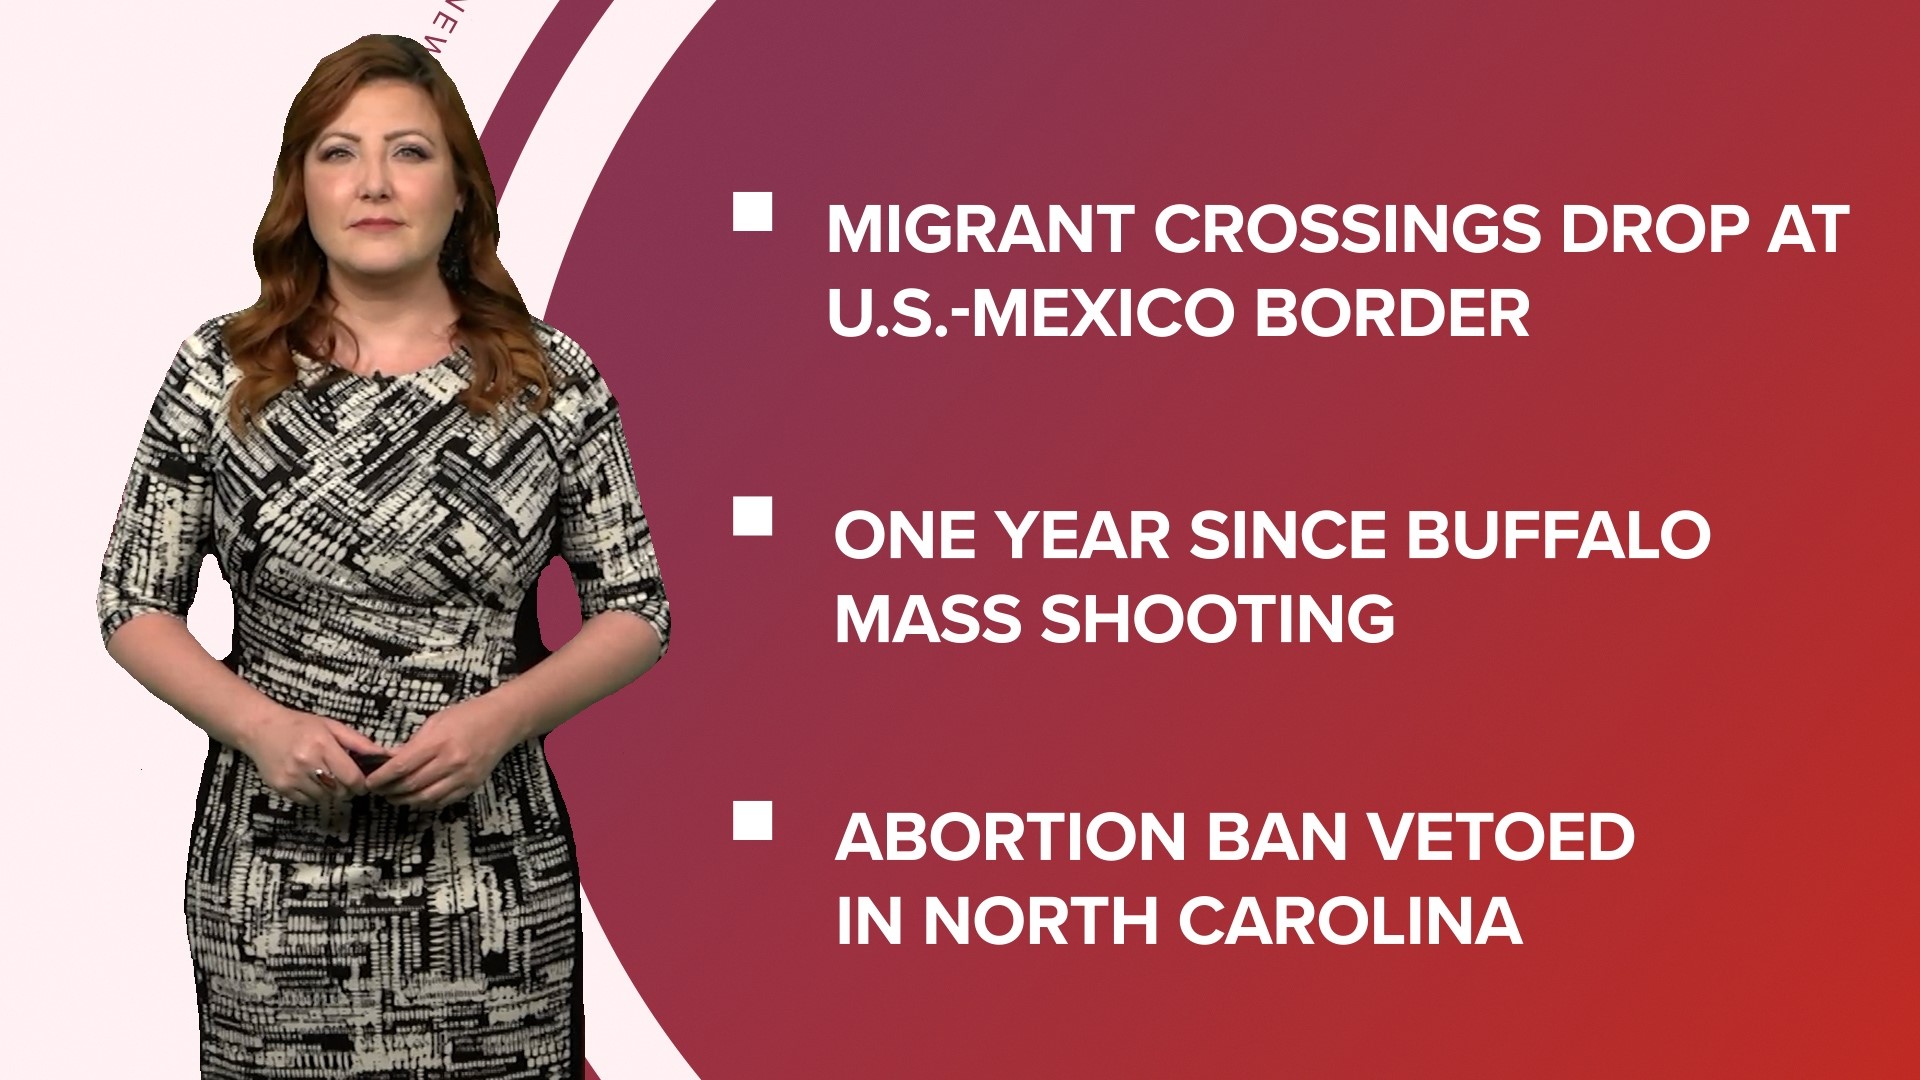 A look at what is happening in the news from fewer migrants crossing the border over the weekend to an abortion ban vetoed and air bag recall drama.